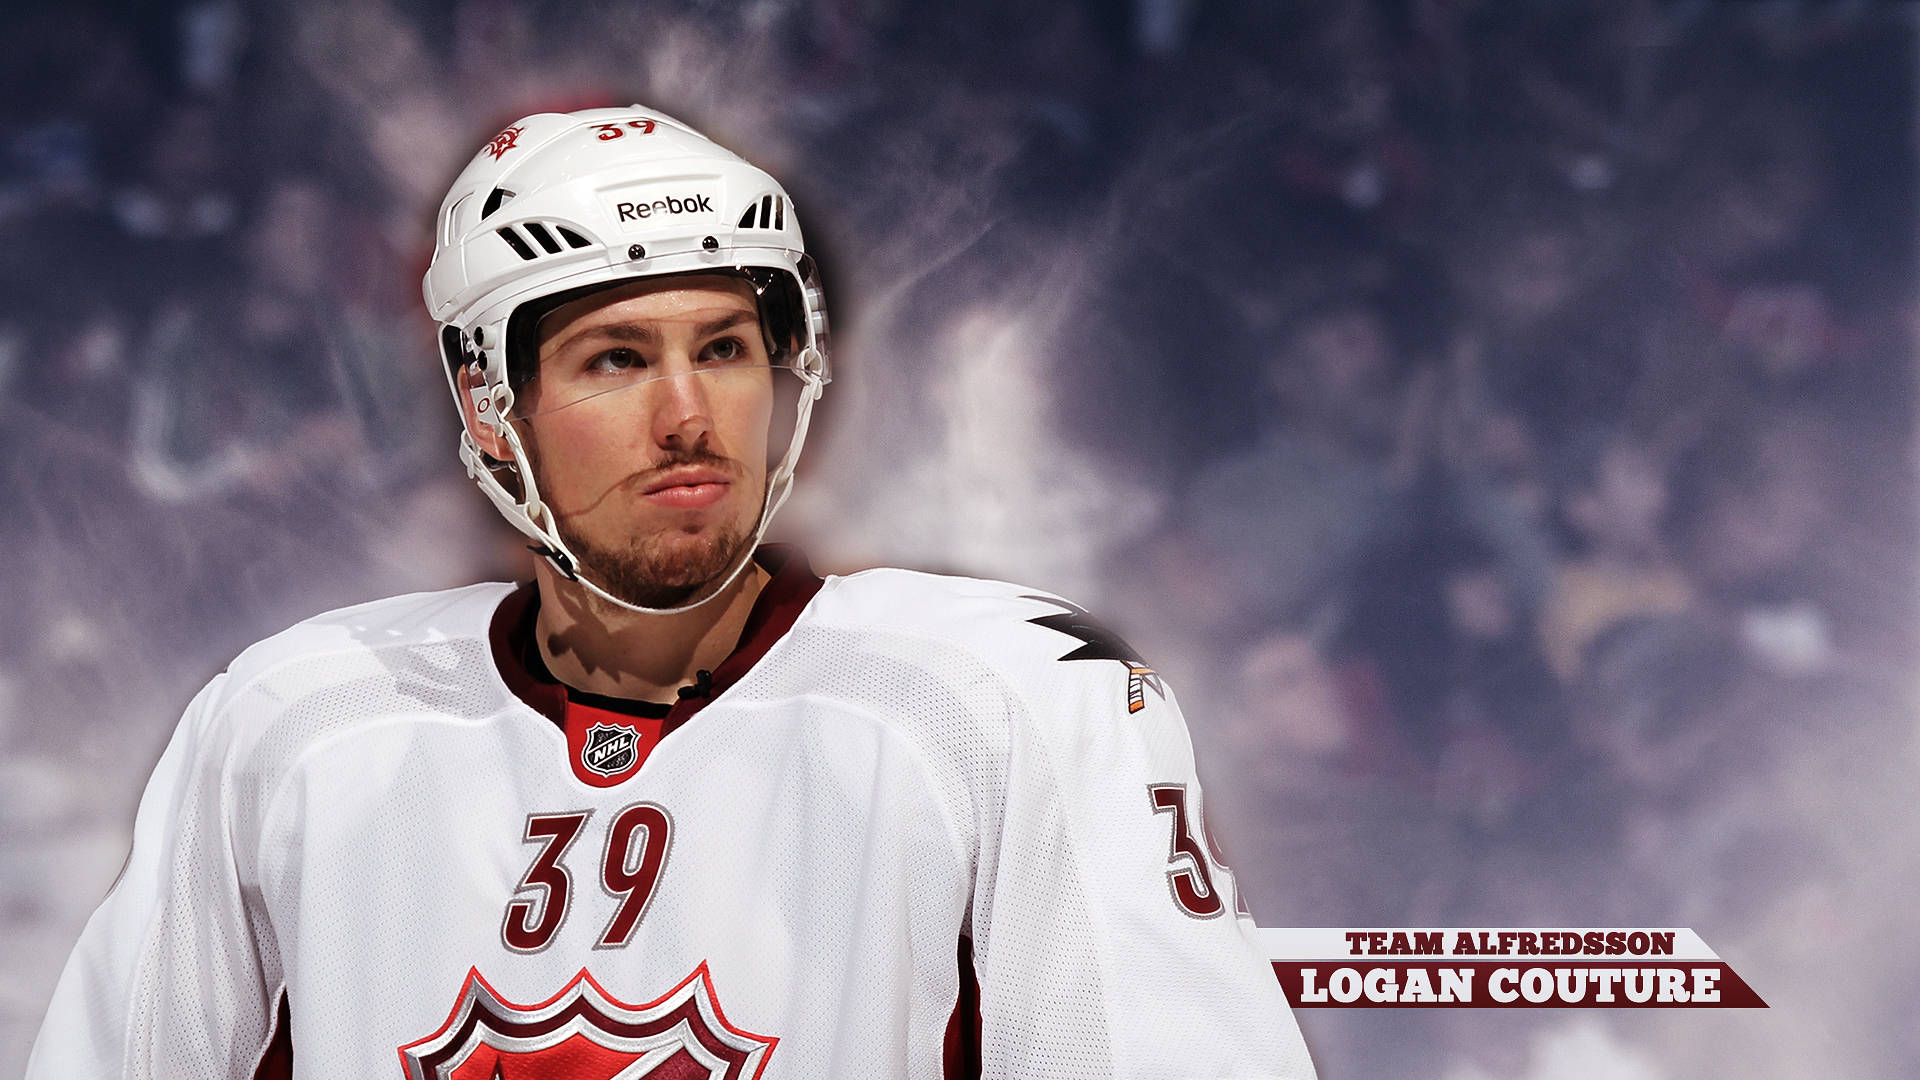 Ice Hockey Player Logan Couture Team Alfredsson Background